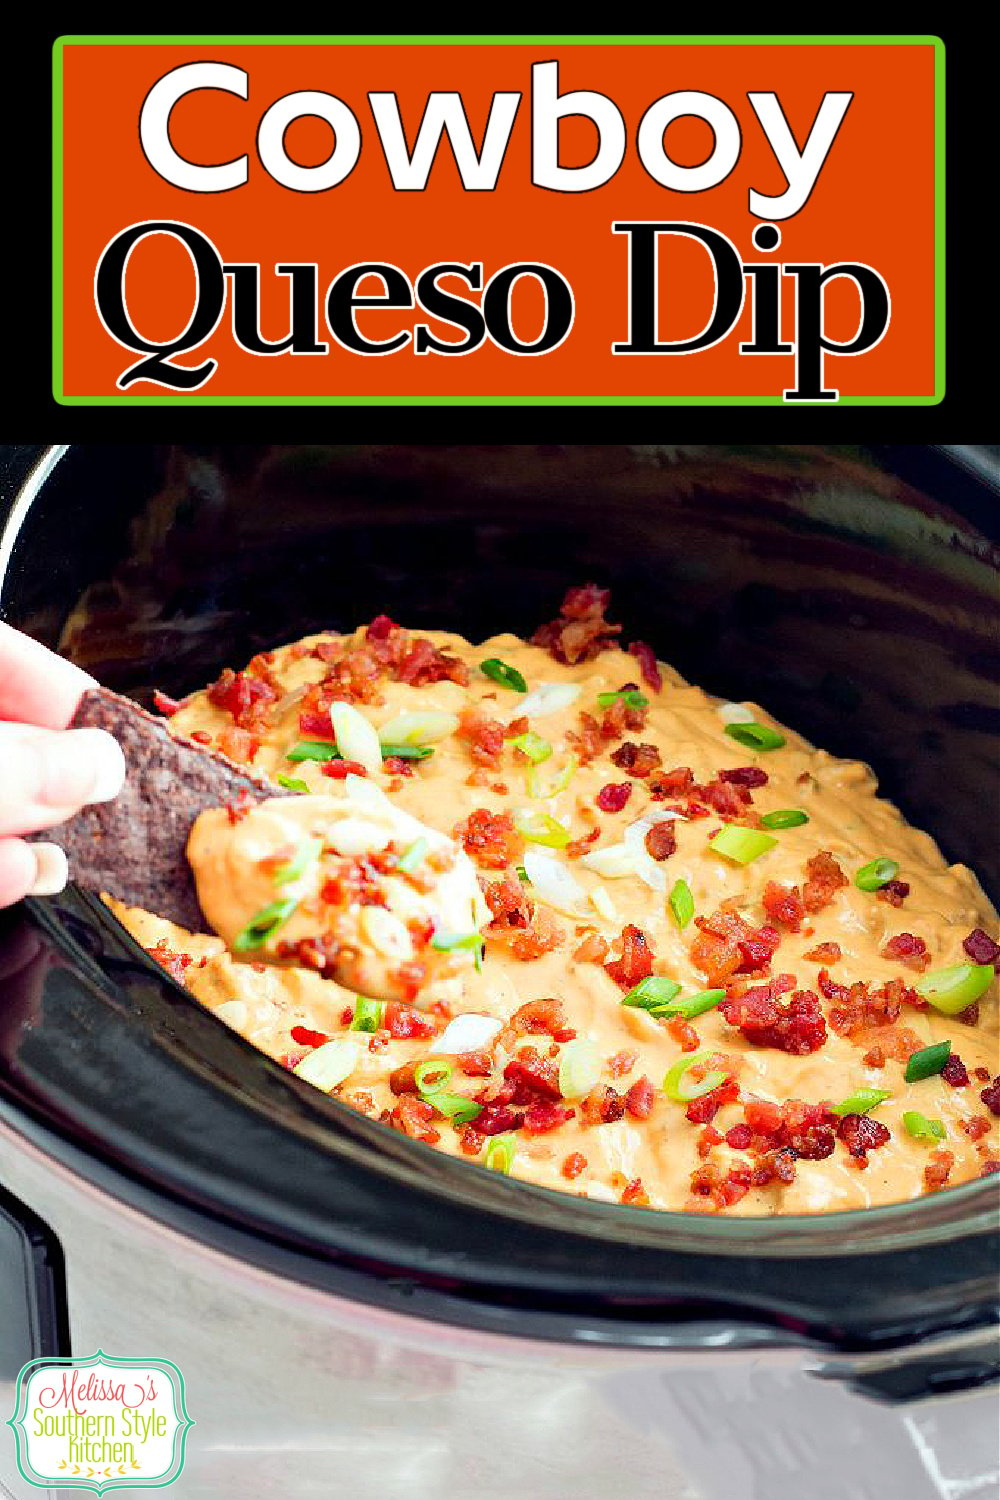 Simmer this flavorful Kickin' Cowboy Queso Dip in your slow cooker #queso #quesodip #diprecipes #cheesedip #cheese #easyrecipes #footballfood #partyfood #appetizers #crockpotrecipes #slowcookerrecipes via @melissasssk